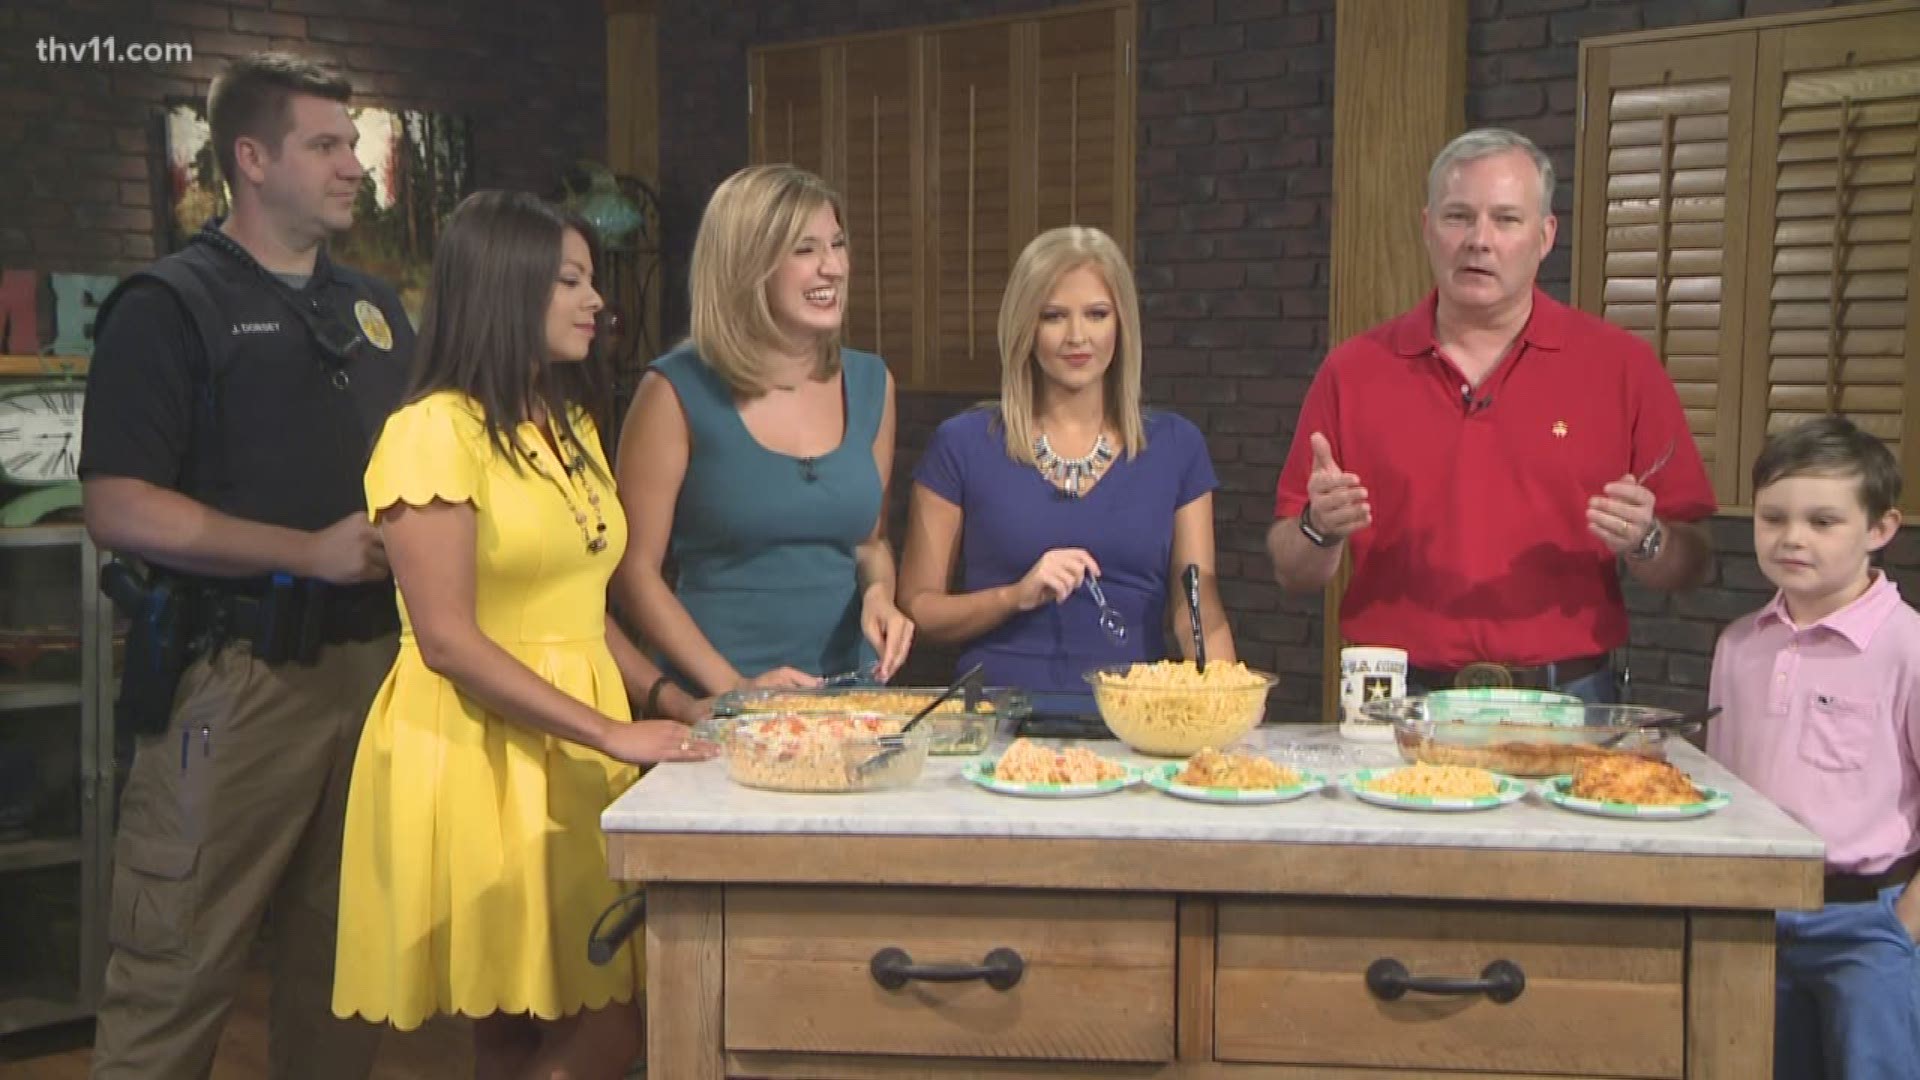 Lt. Gov. Tim Griffin brought some delicious crawfish mac and cheese for a contest against the morning team.